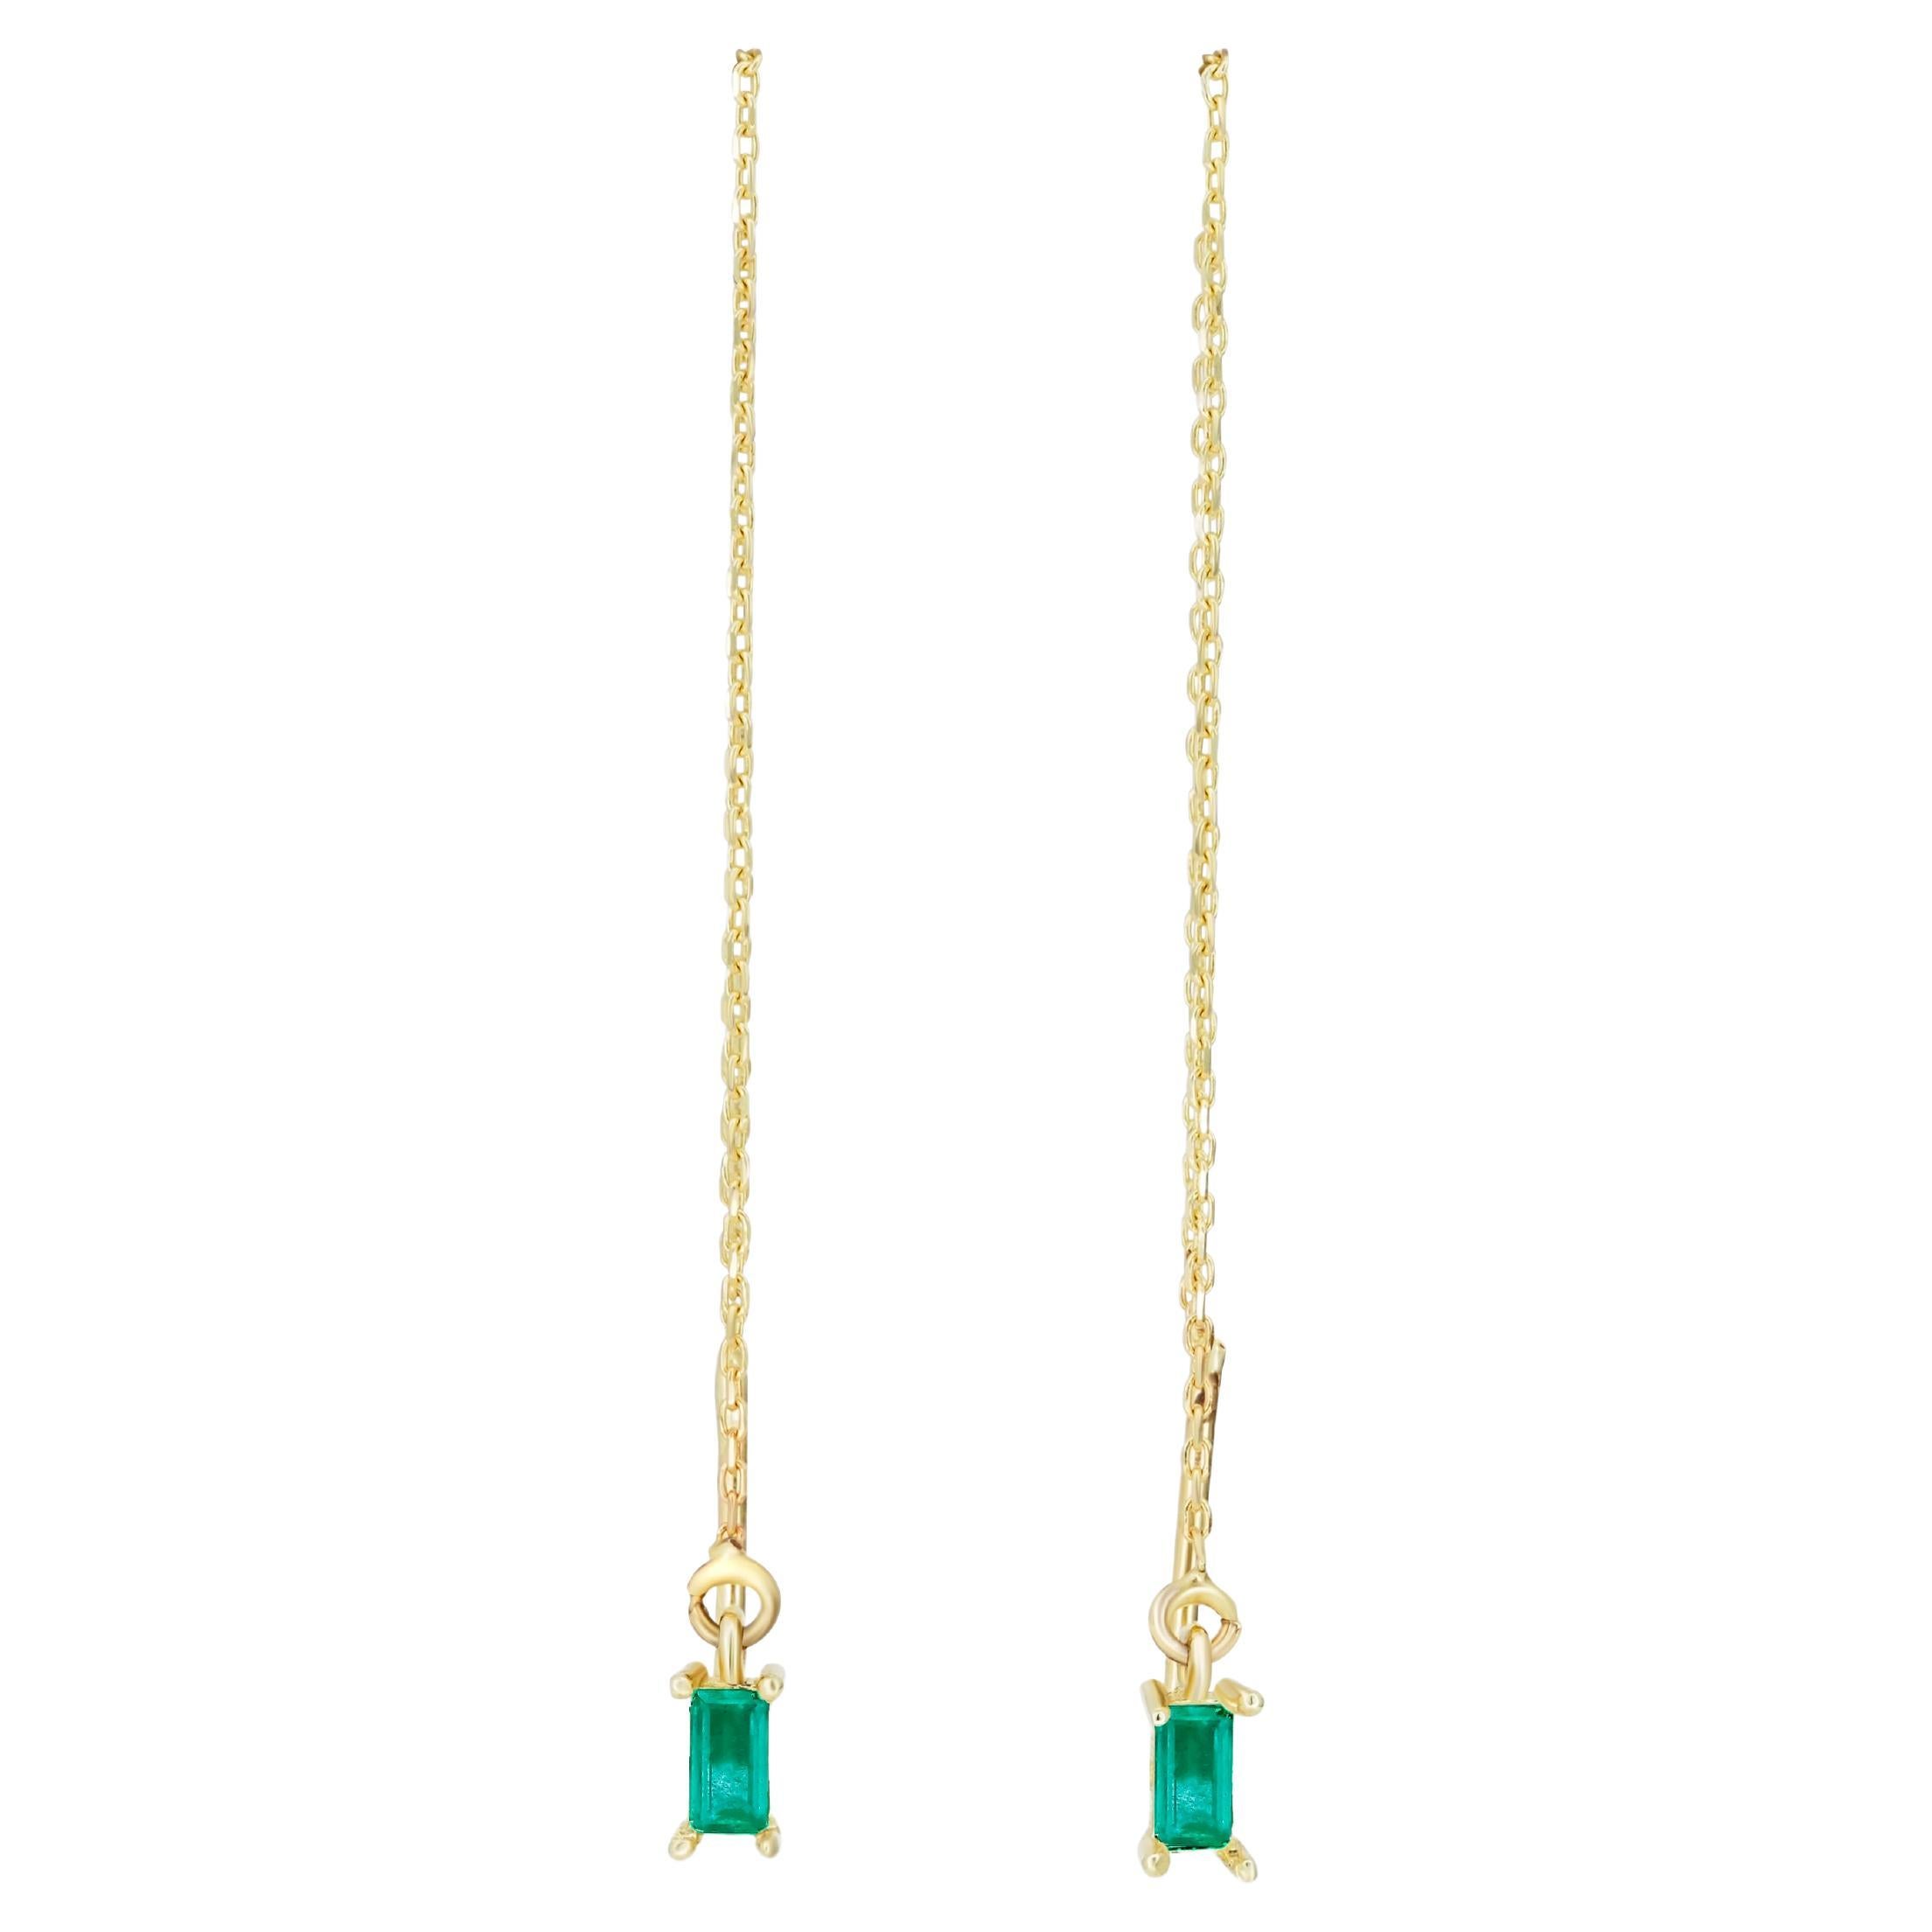 14k Solid Gold Drop Earrings with Emeralds, Chain Gold Earrings